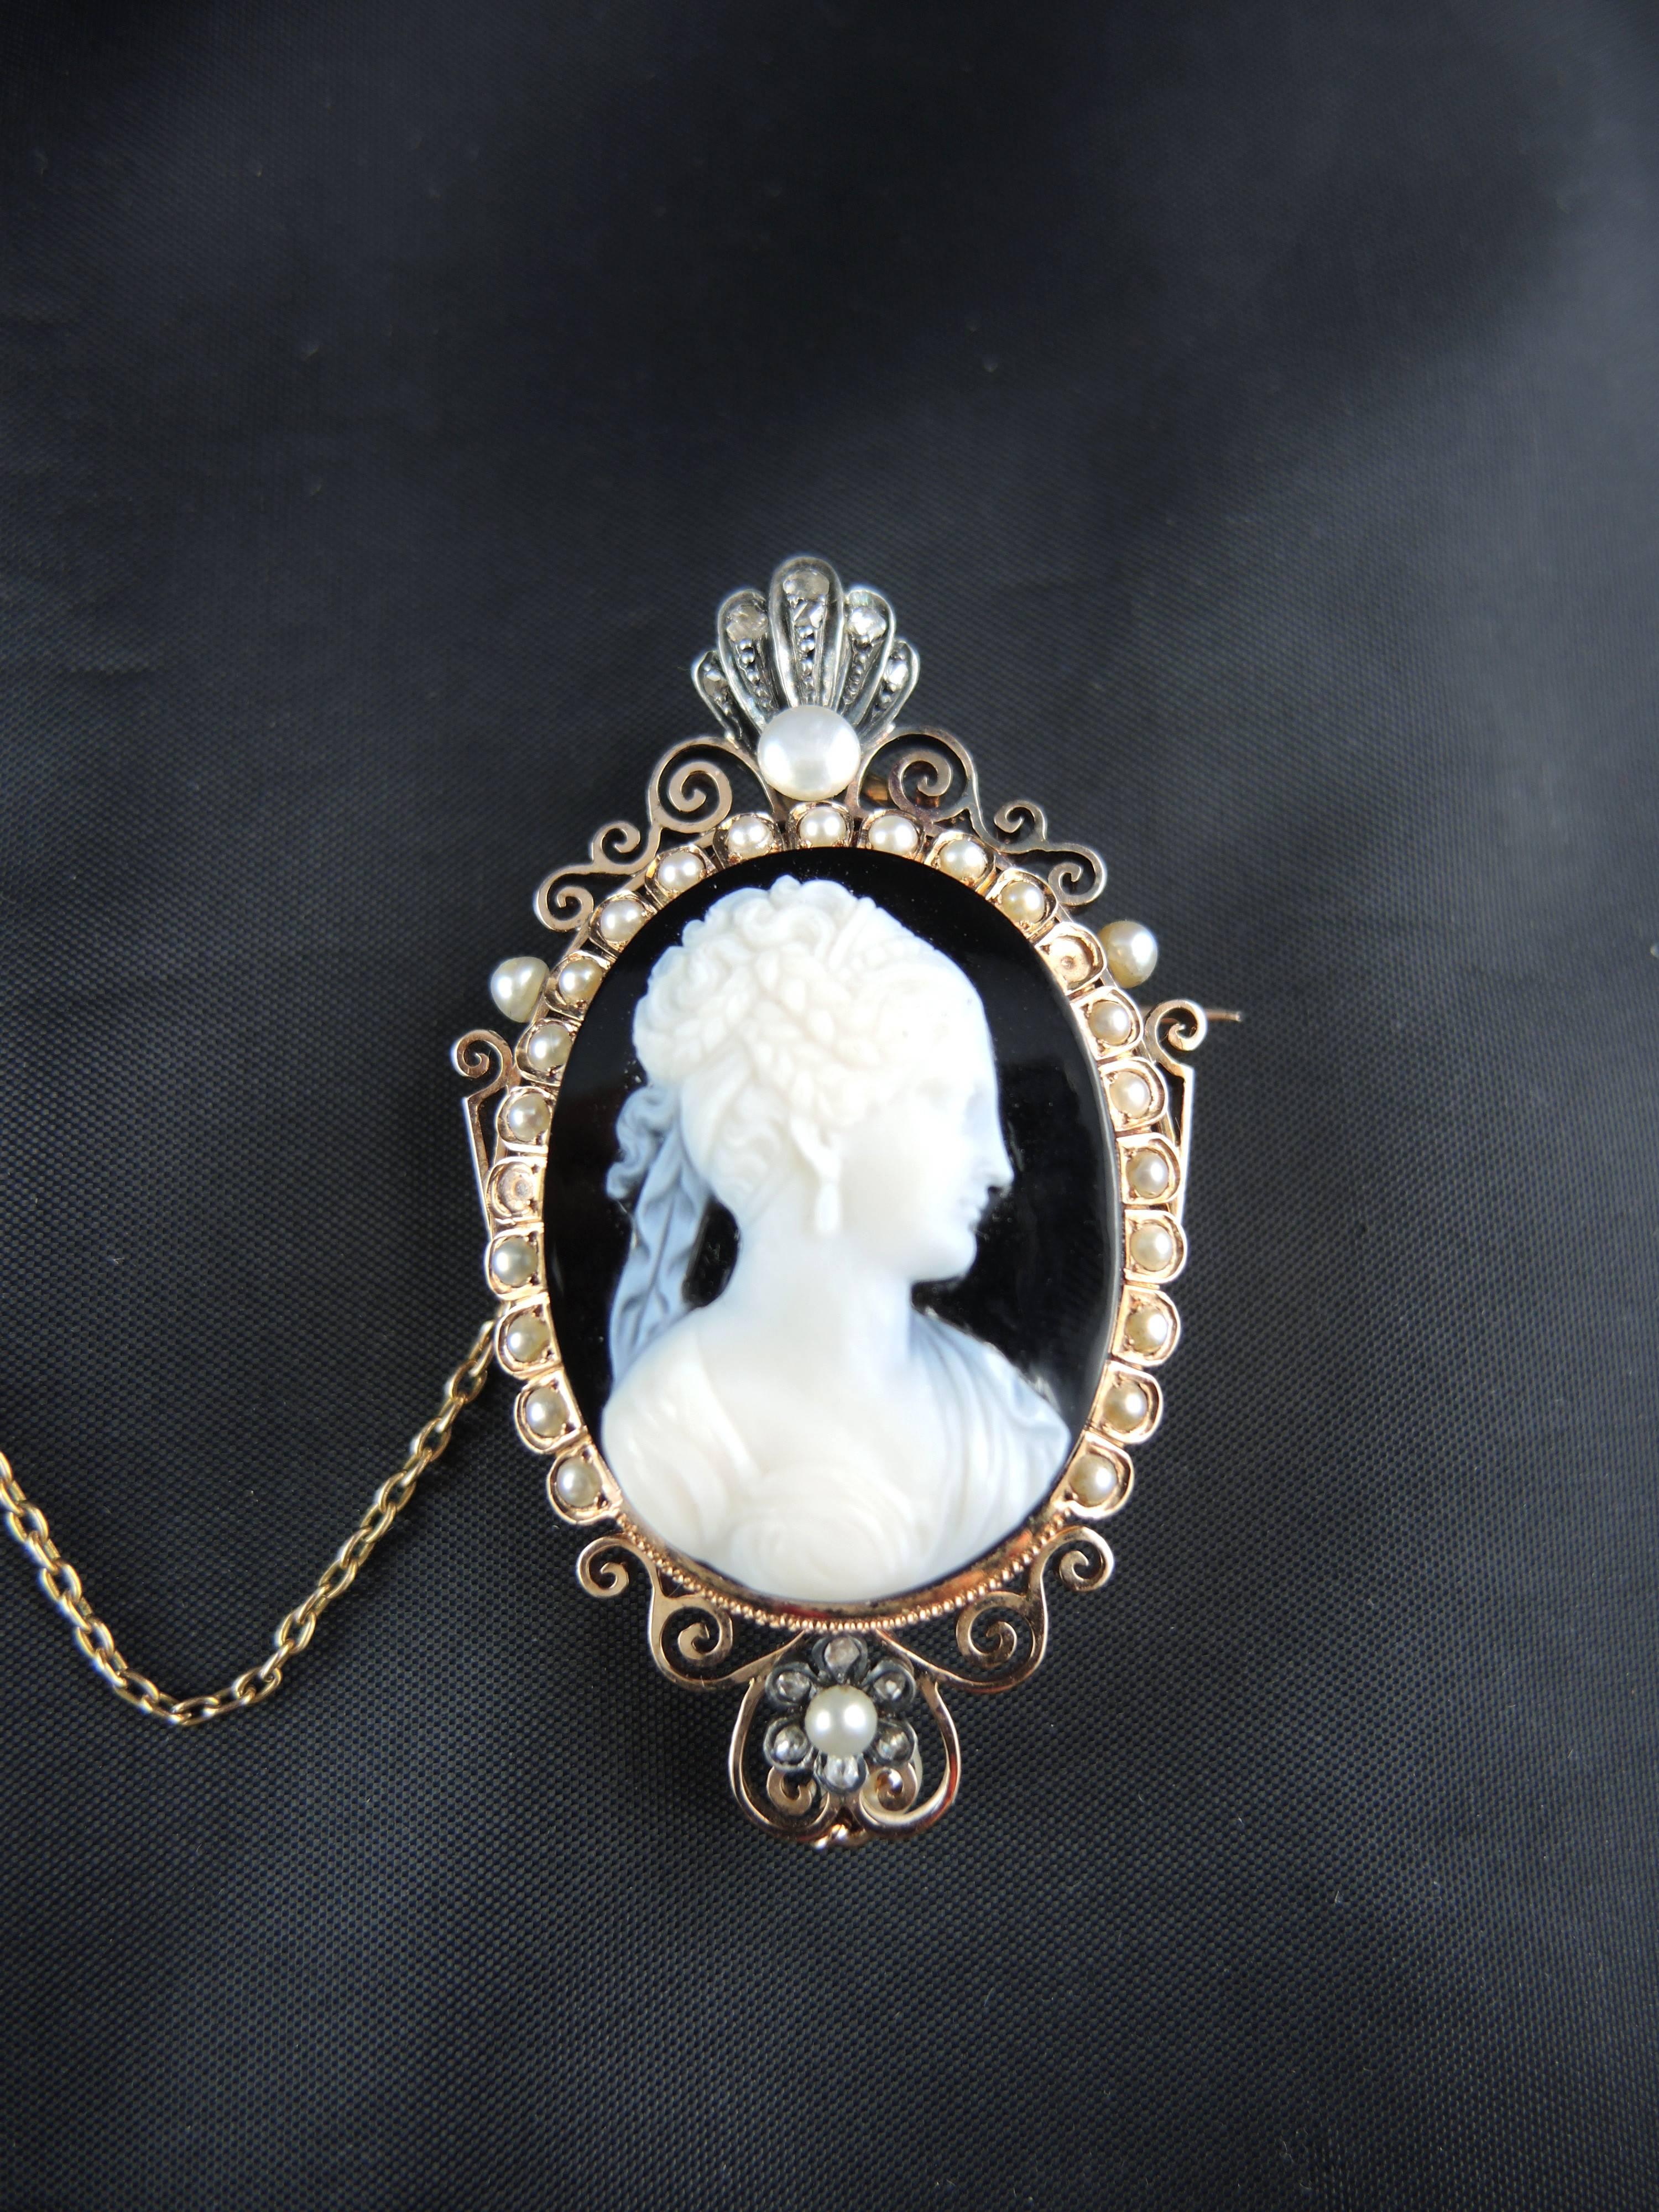 18kt rose gold brooch and pendant (quality mark: eagle's head) set with an agate cameo portraying a woman, surrounded with natural pearls and rose cut diamonds.

French work from the middle of the 19th century.

Weight: 21,90g
Height: 6,00 cm

State